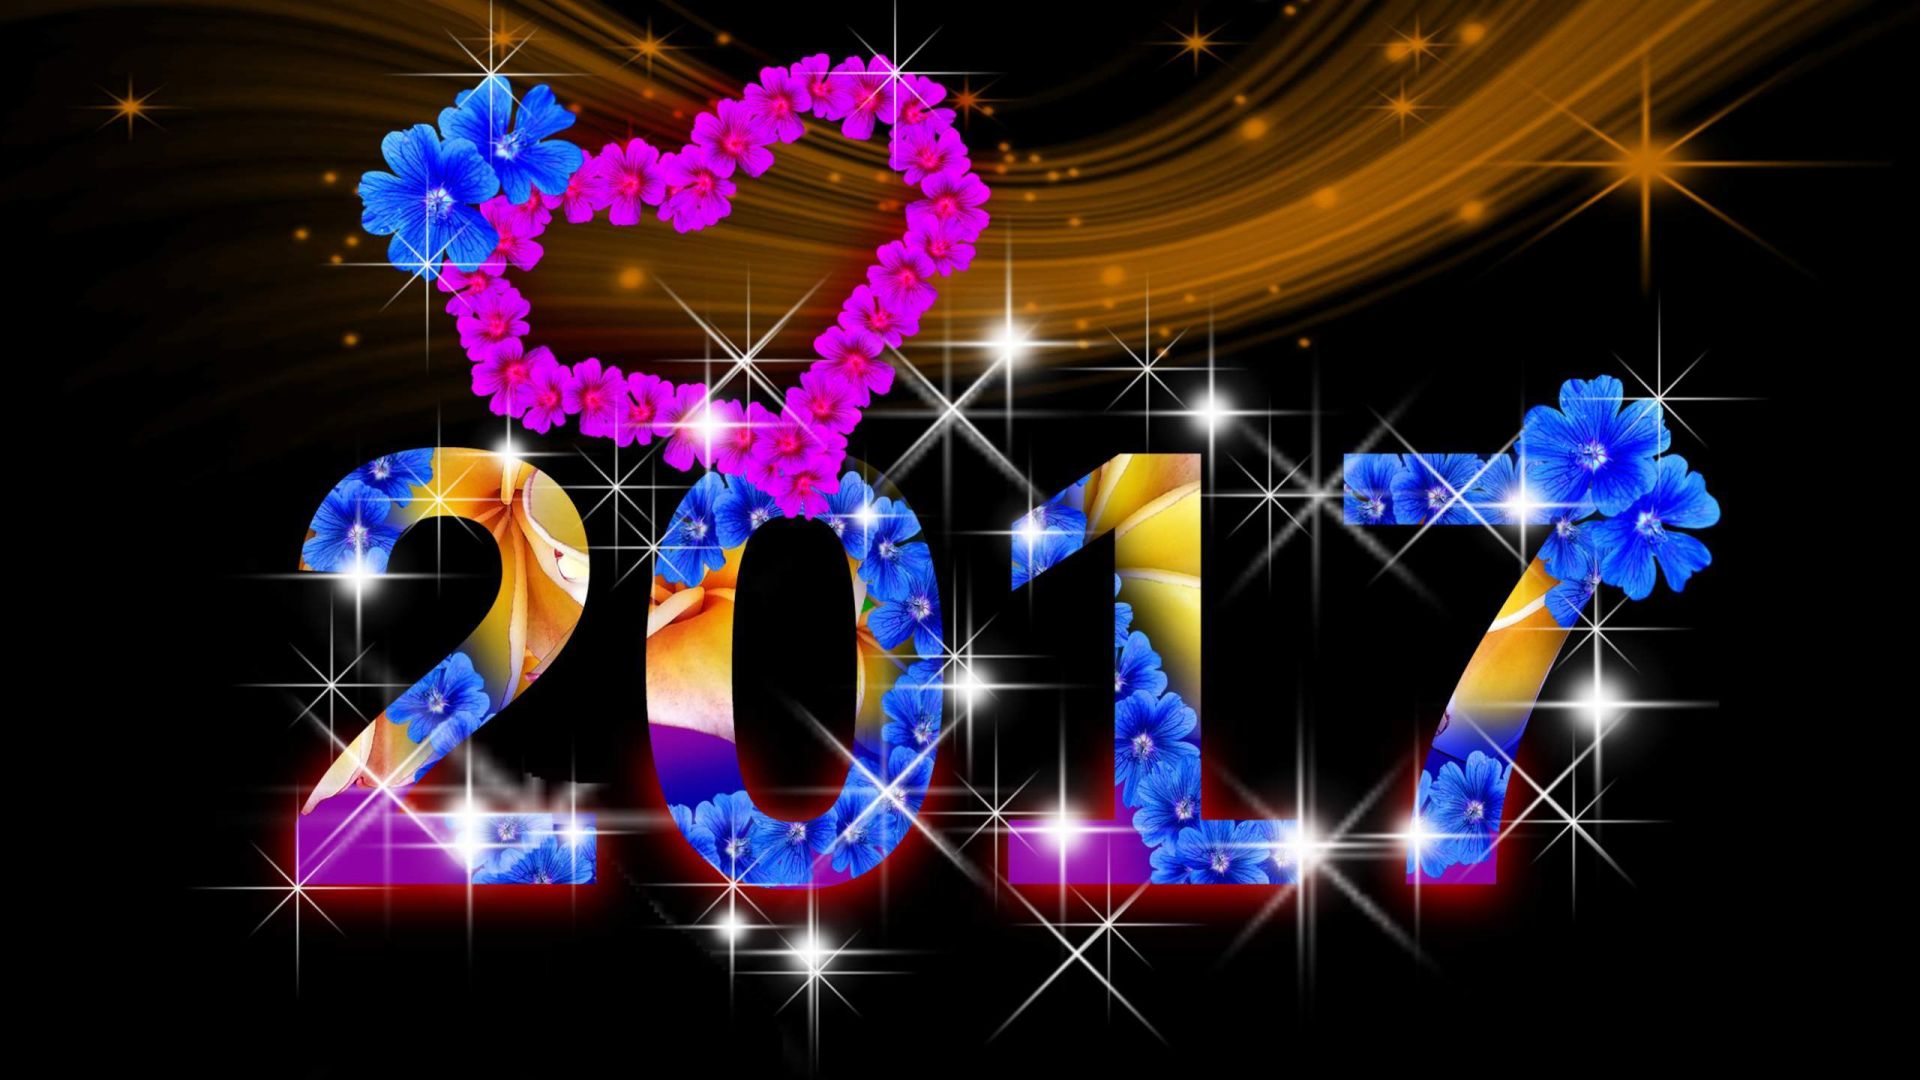 Wallpaper New year 2017 with love